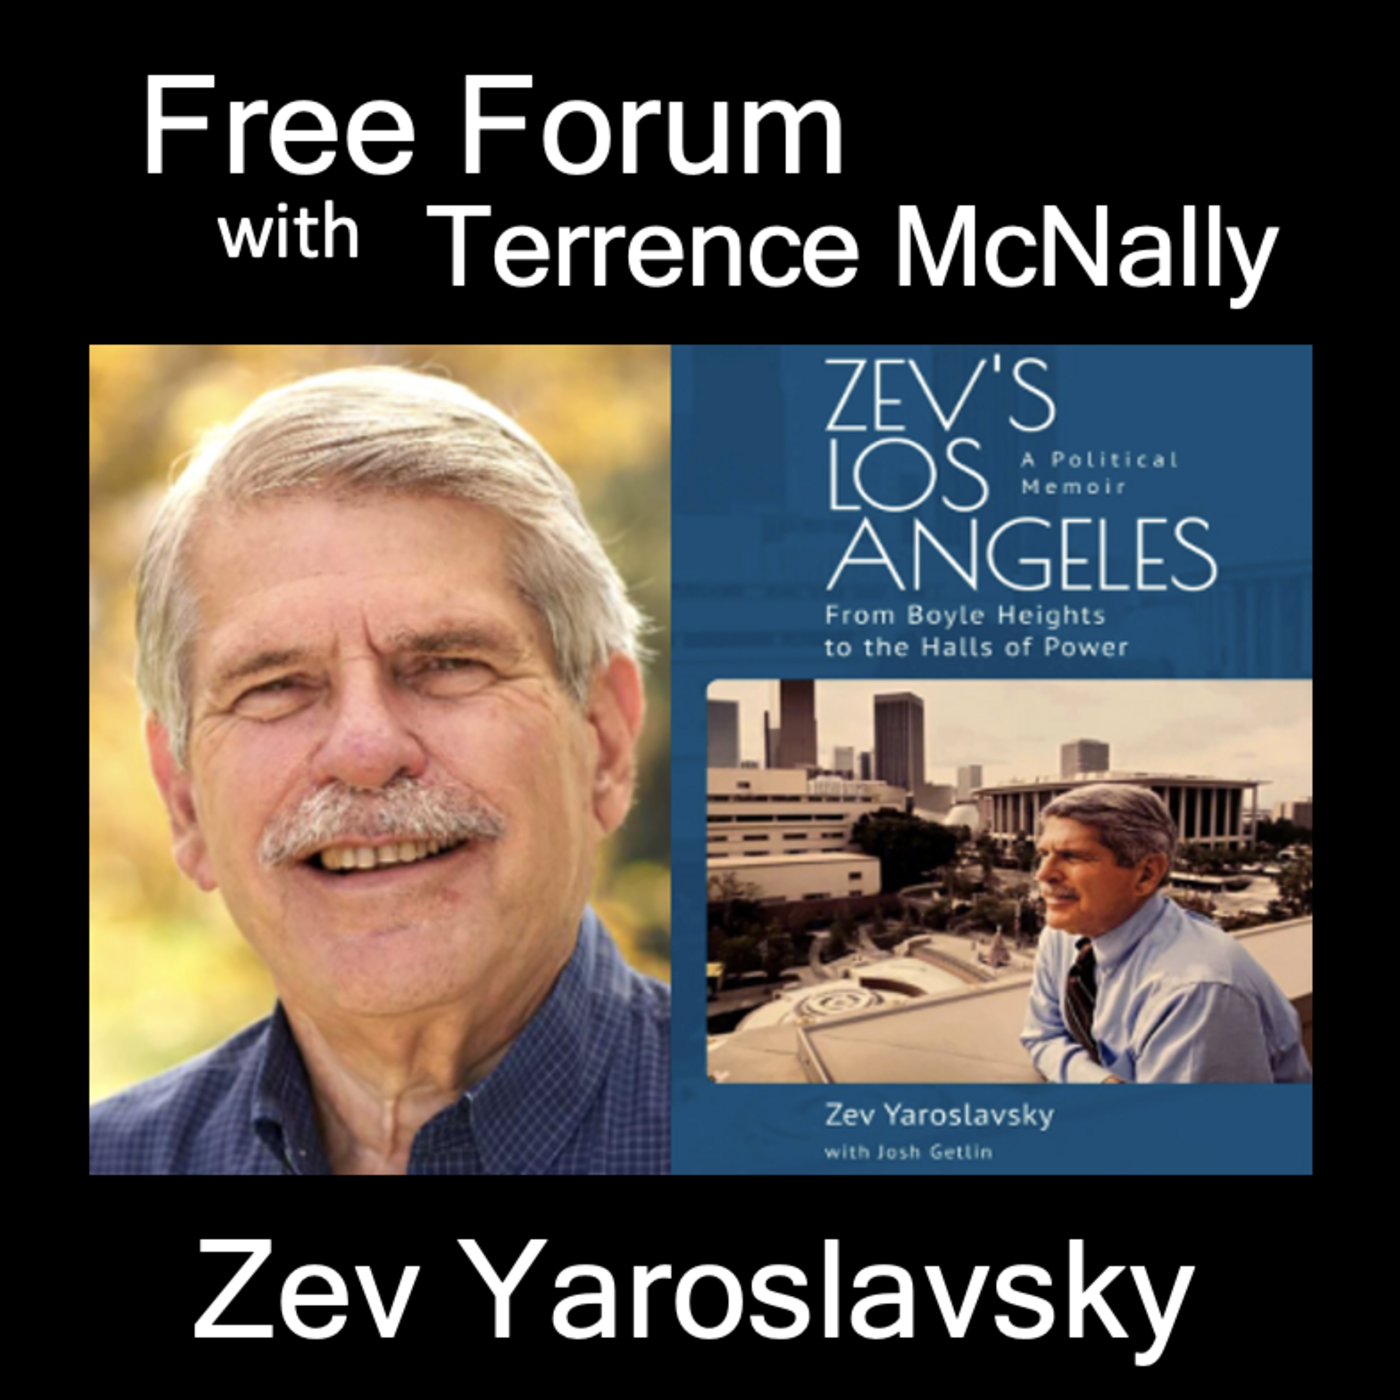 Episode 624: ZEV YAROSLAVSKY - 40 years of public service - ZEV’S LOS ANGELES: From Boyle Heights to the Halls of Power